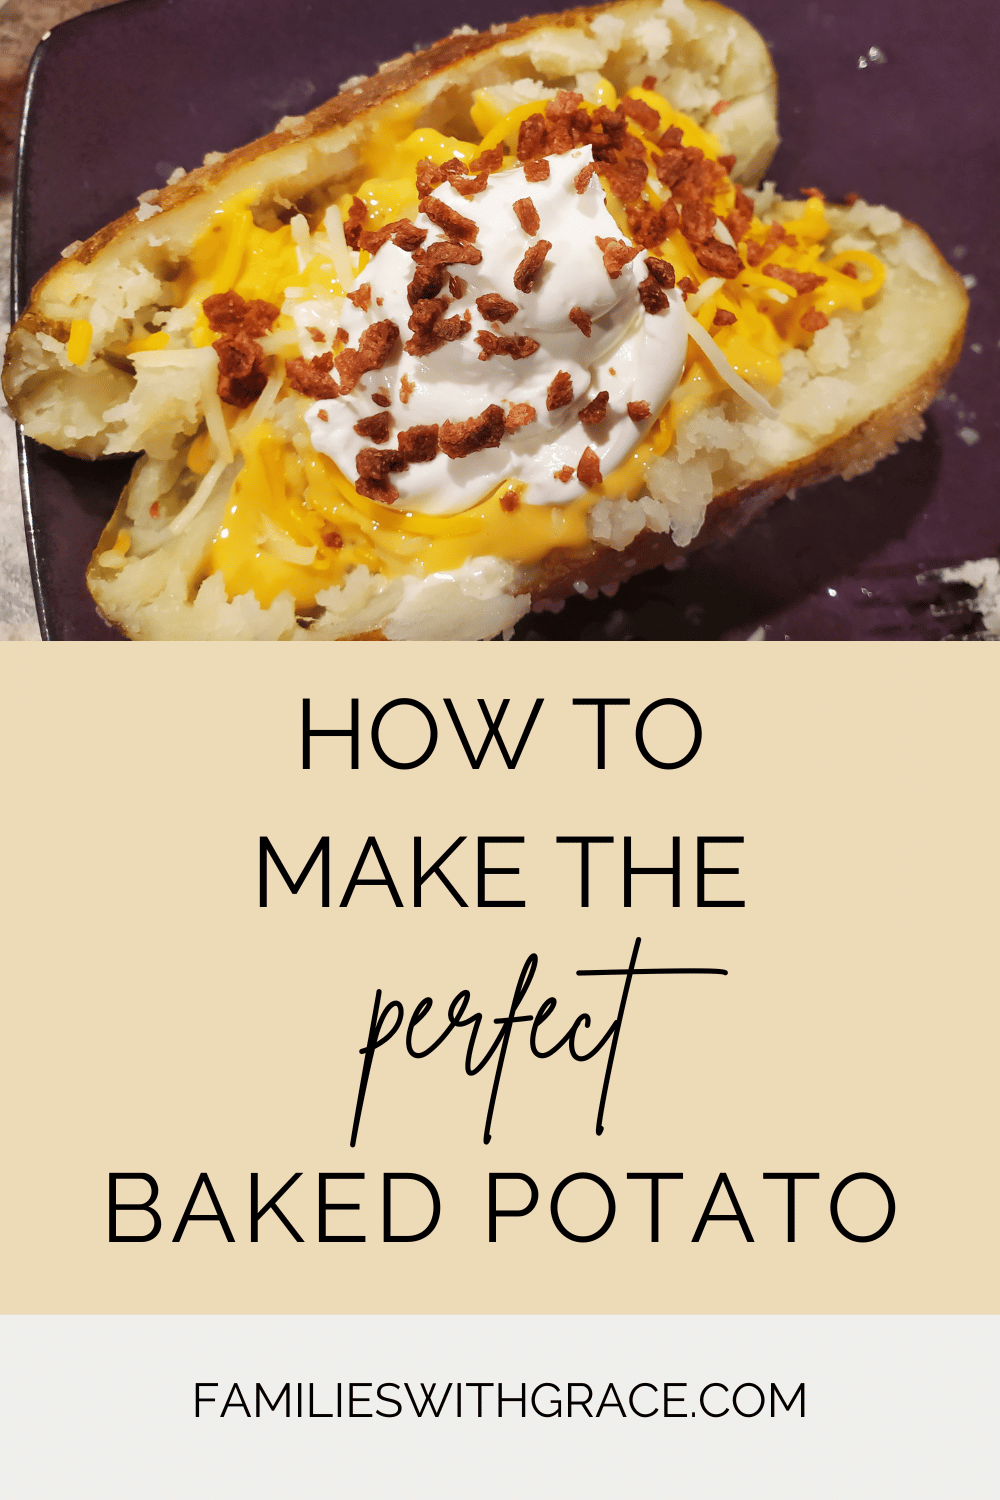 The best microwave baked potato recipe